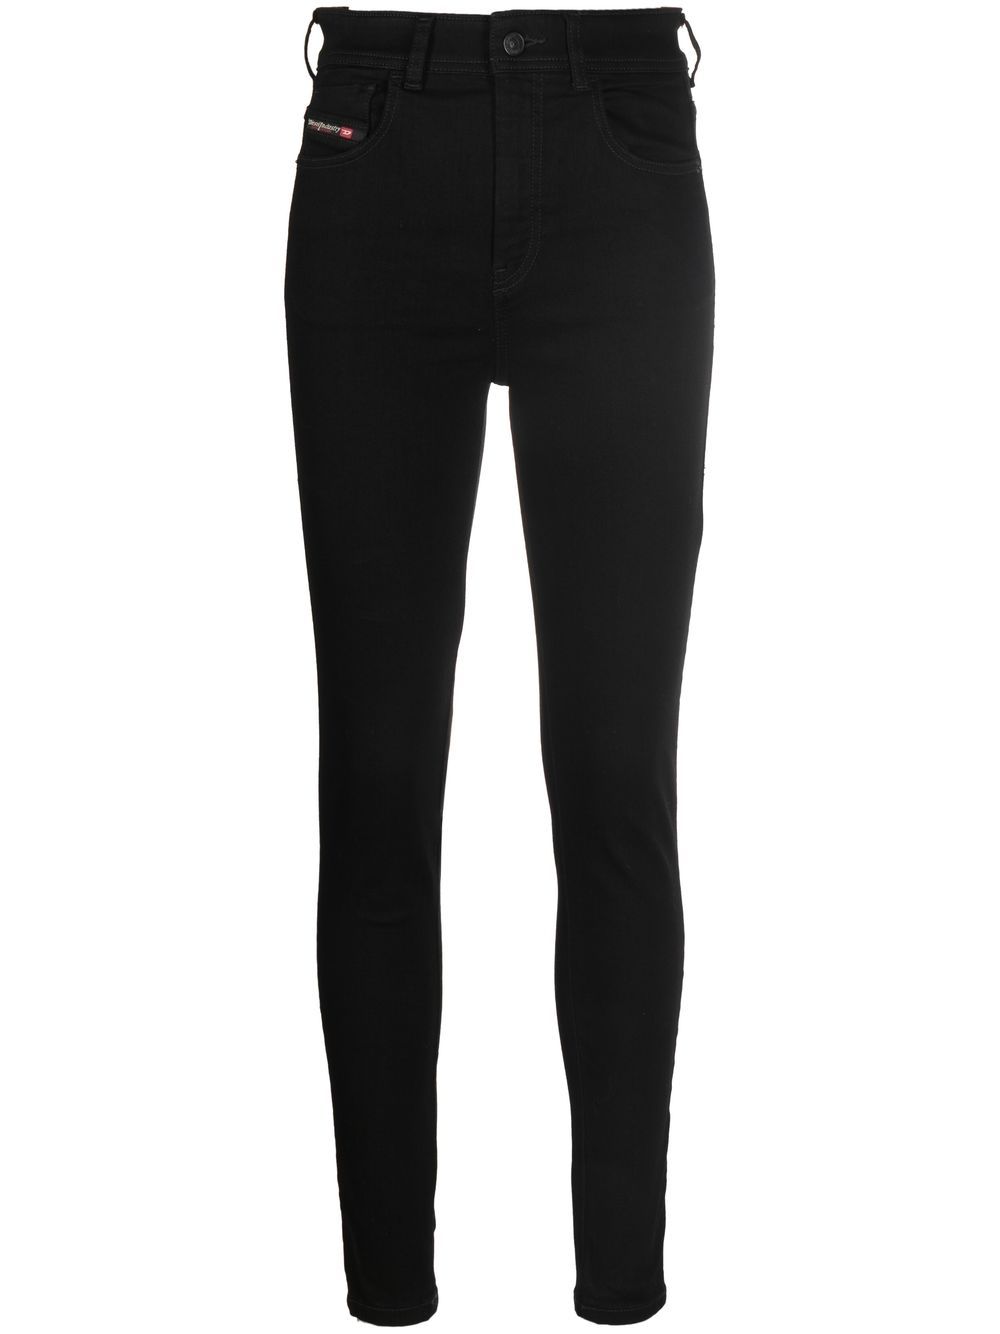 Image 1 of Diesel high-waisted skinny jeans